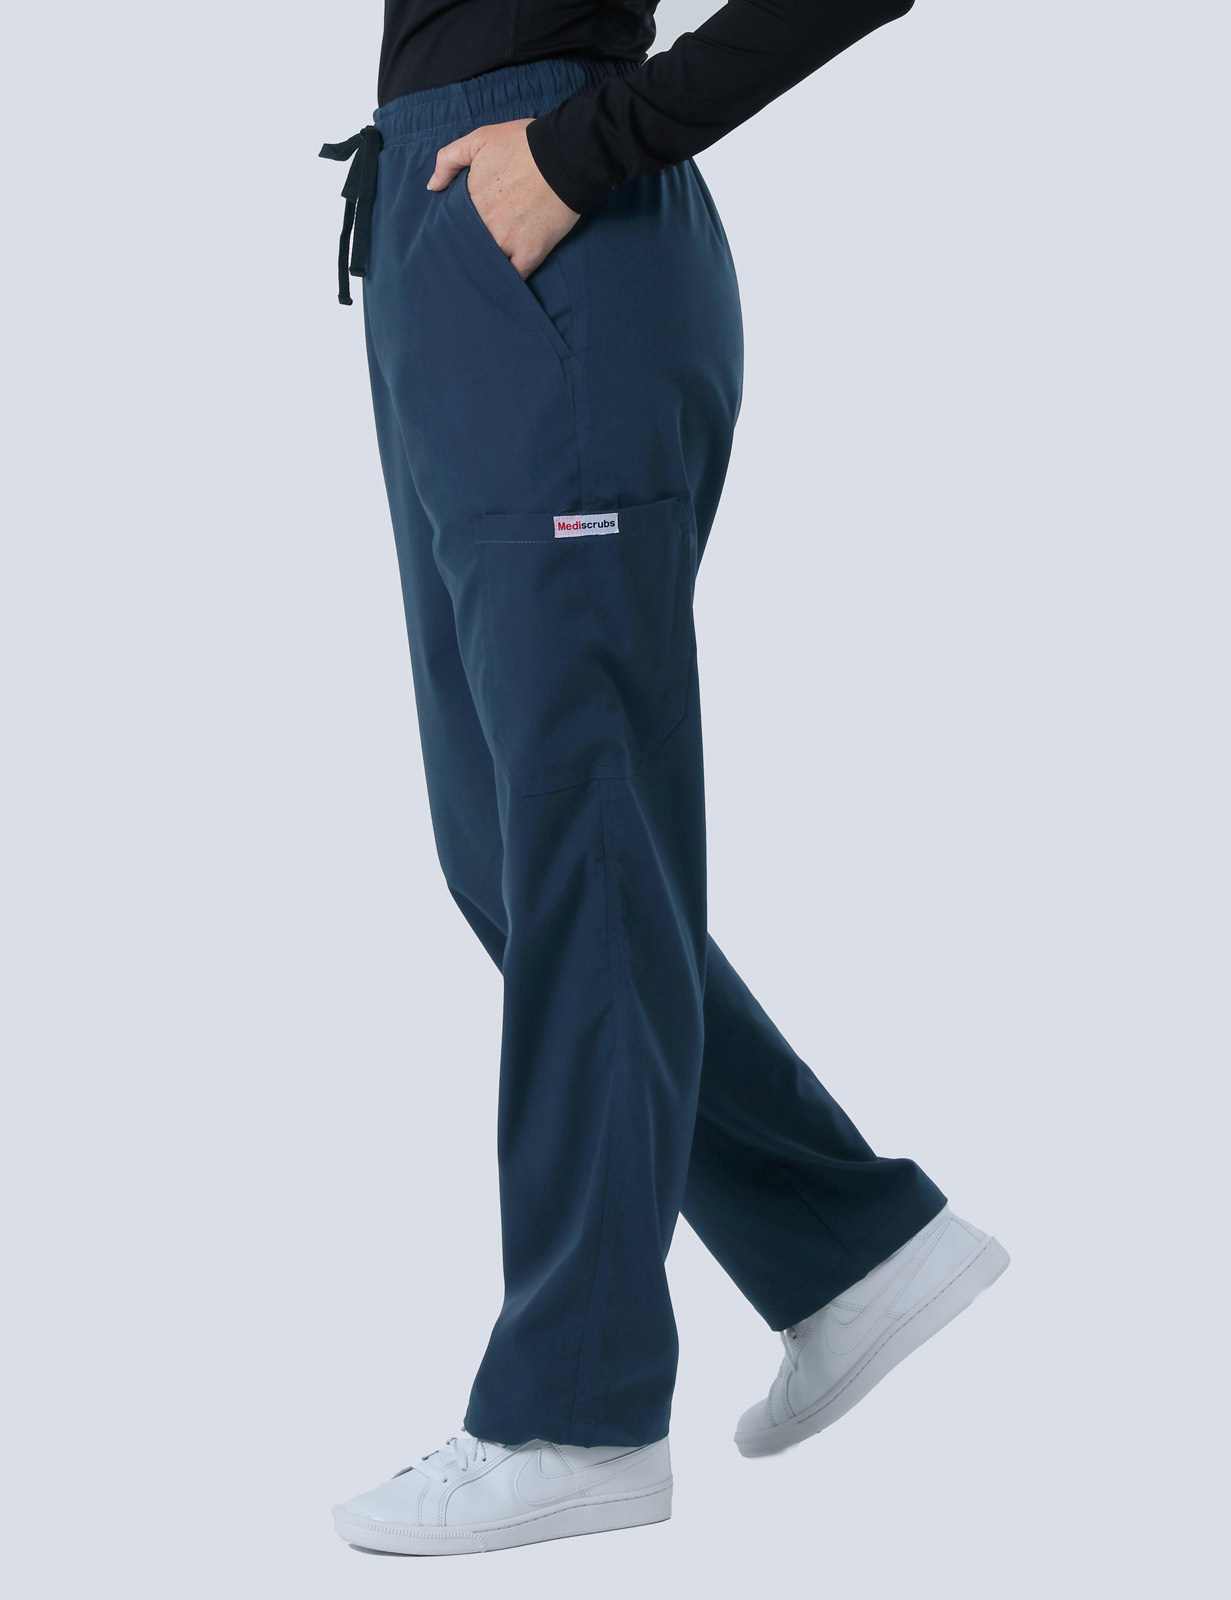 PAH - Vascular Sonographer (Women's Fit Solid Scrub Top and Cargo Pants in Navy incl Logos)